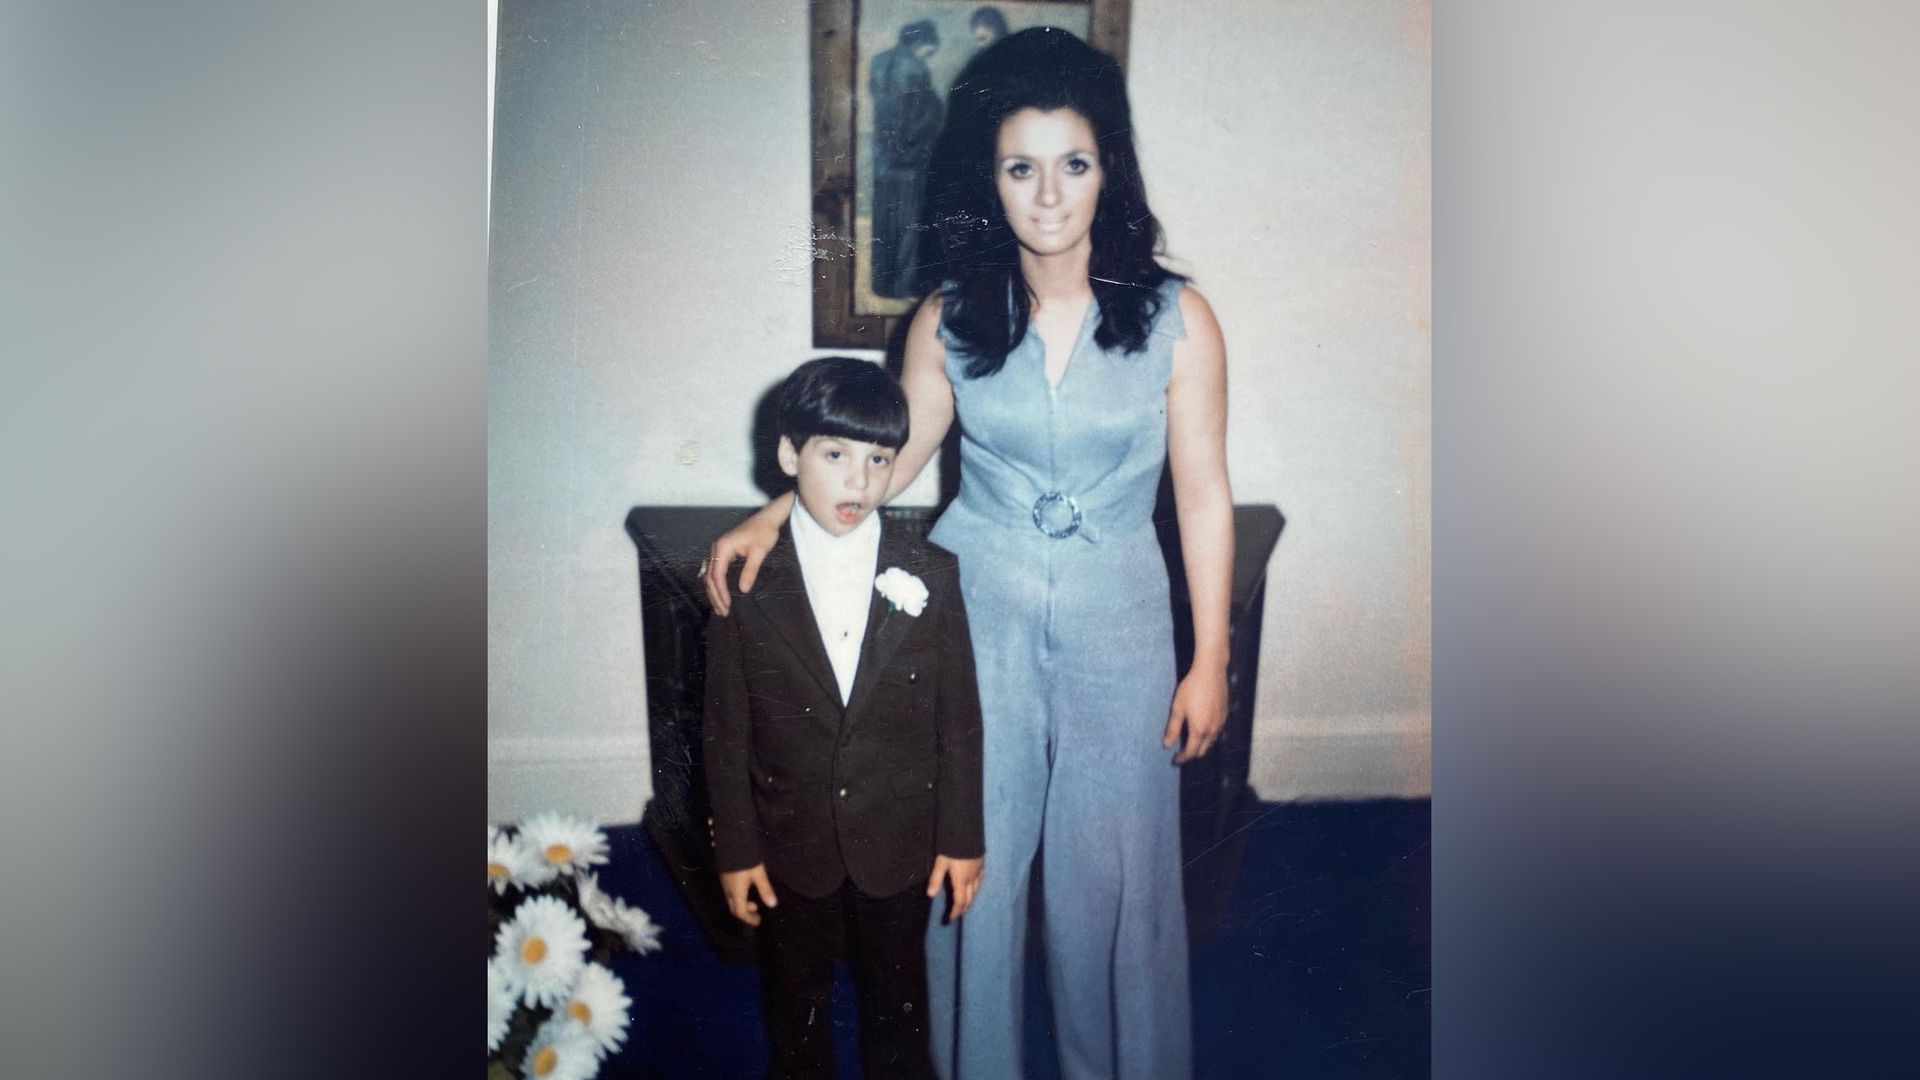 Frank Grillo as a child with his mother